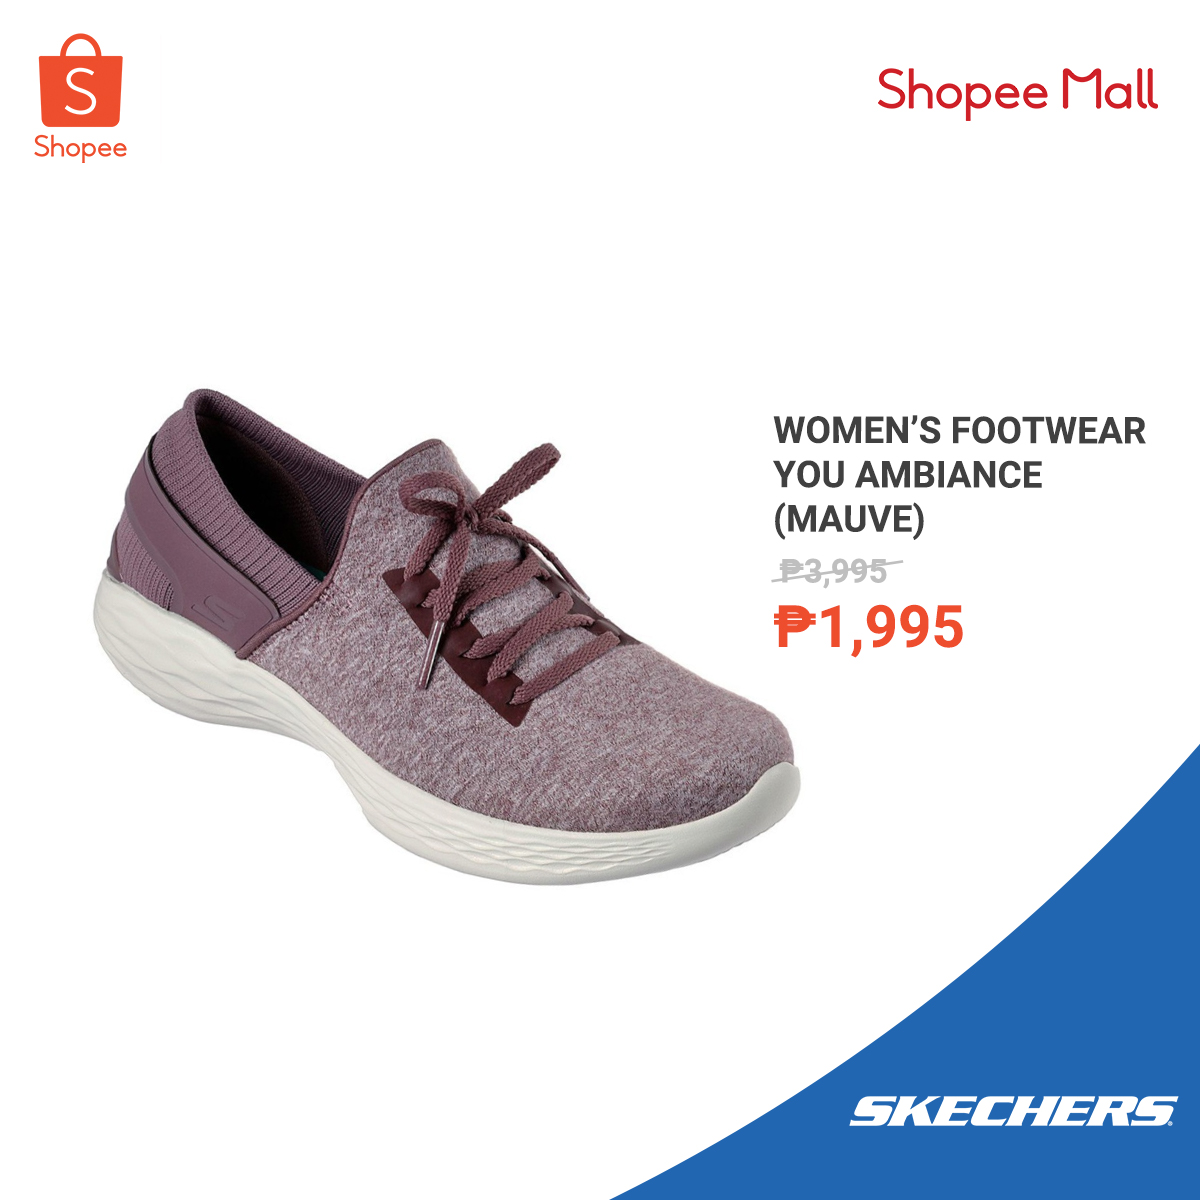 Complete Your OOTD Look with These Stylish Yet Comfy Shoes from ...